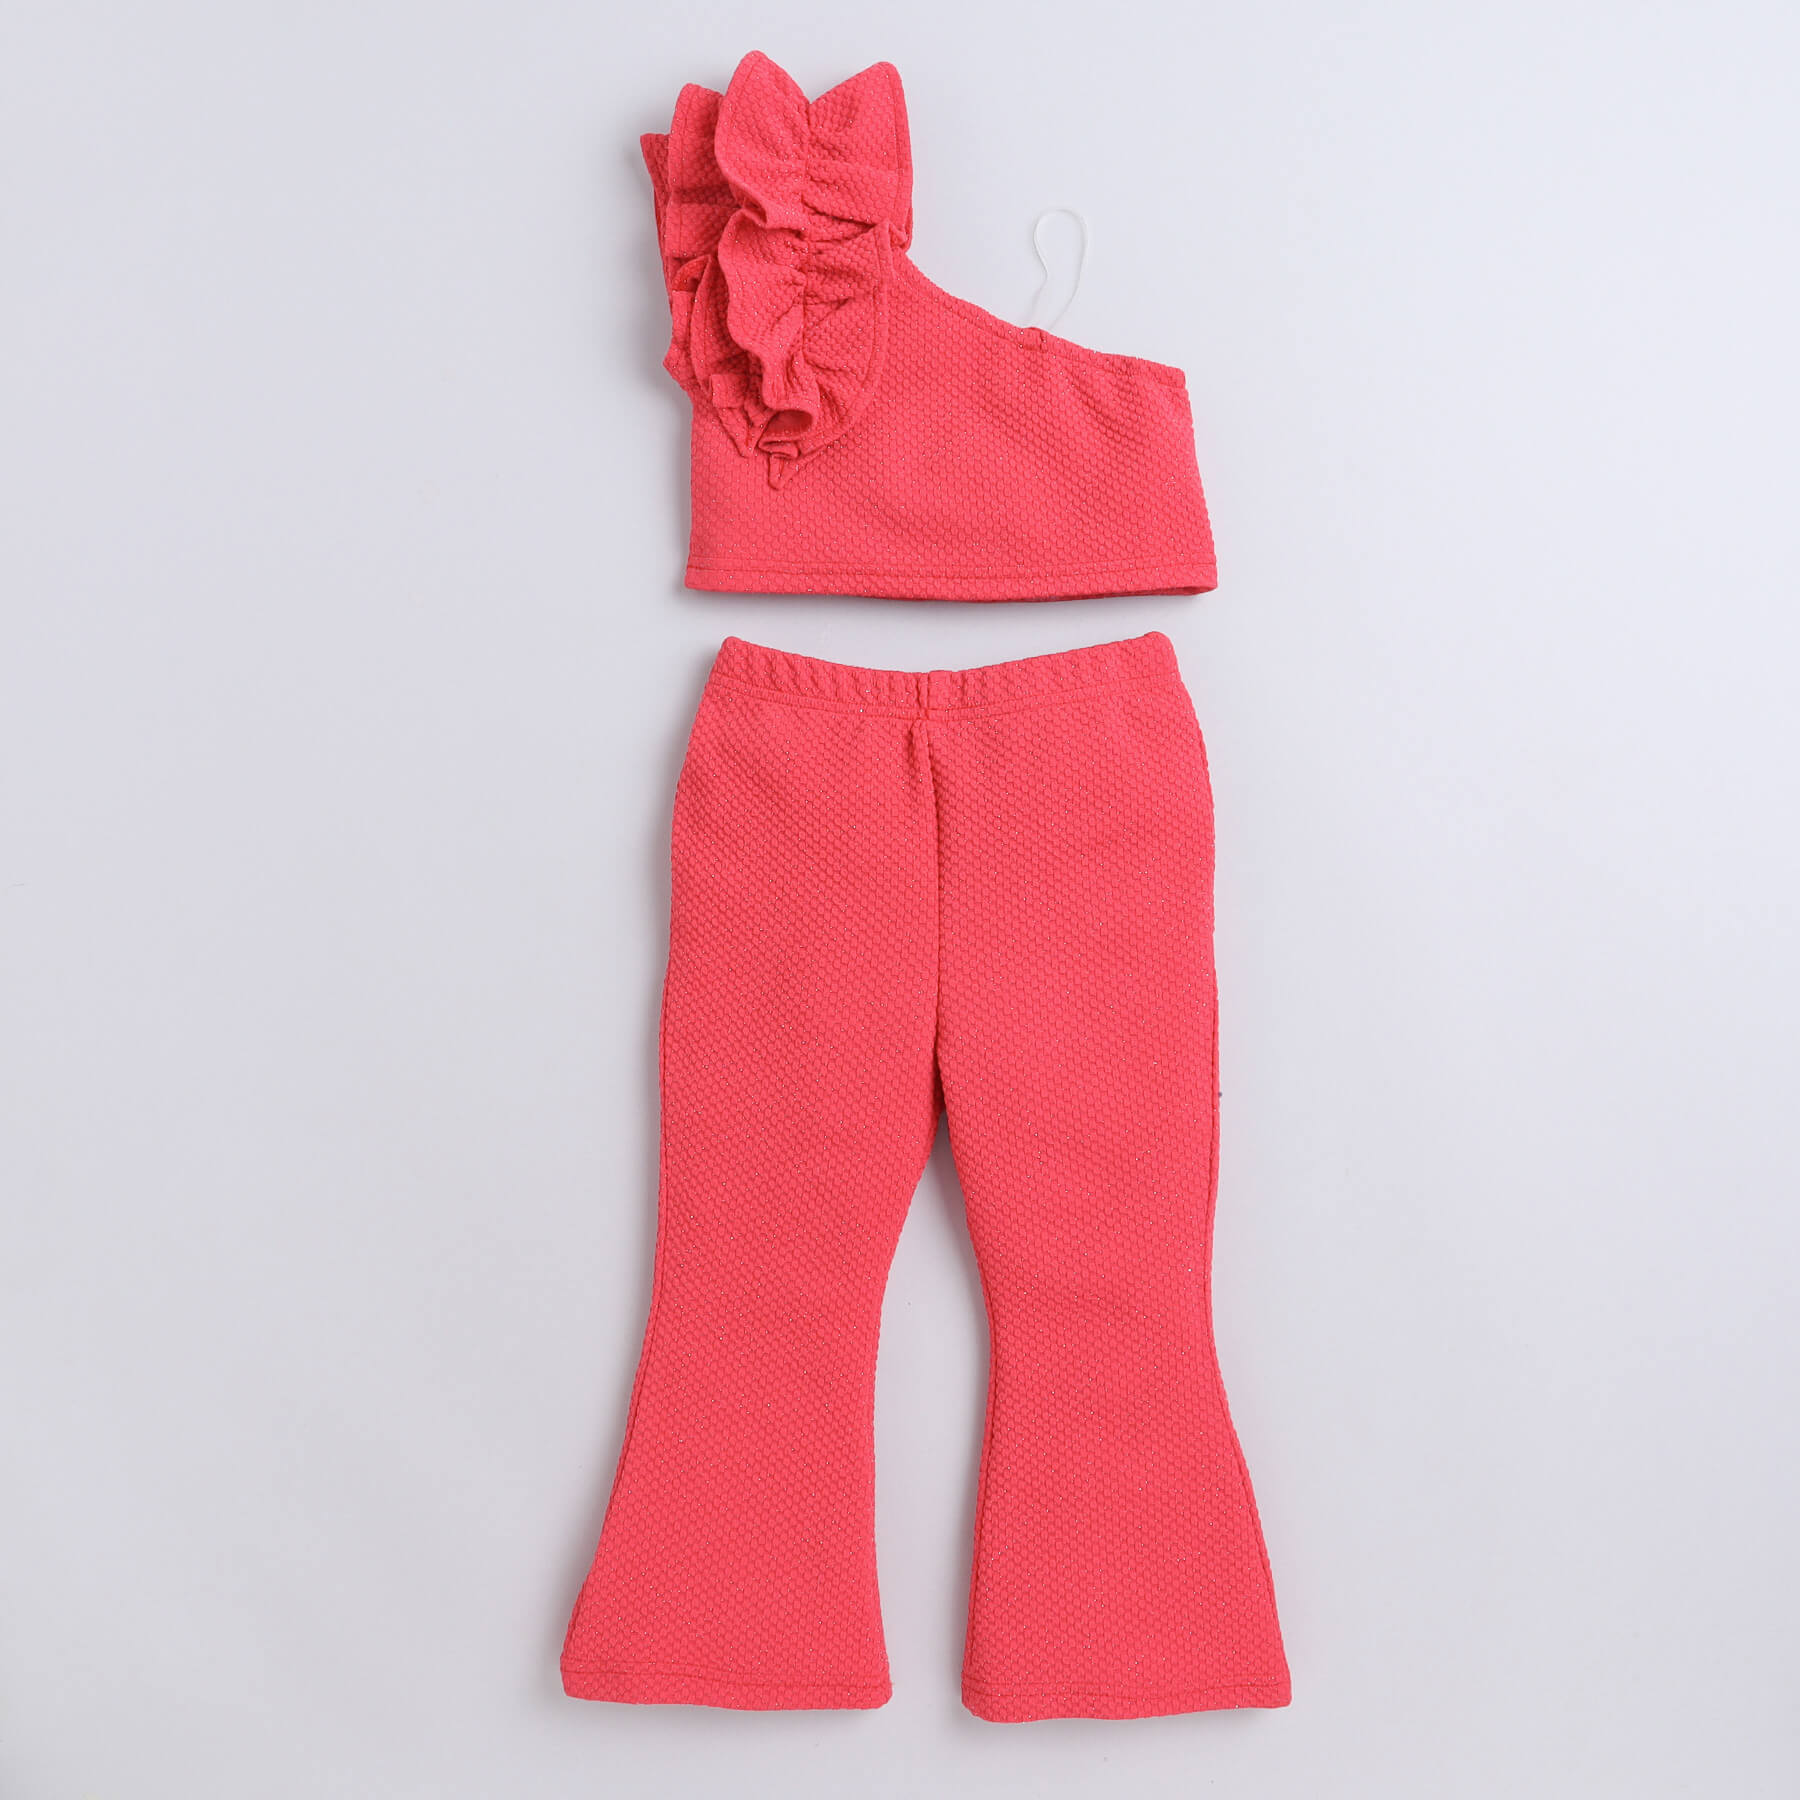 Taffykids ruffle detail one shoulder party crop top and bell bottom pant set-Red